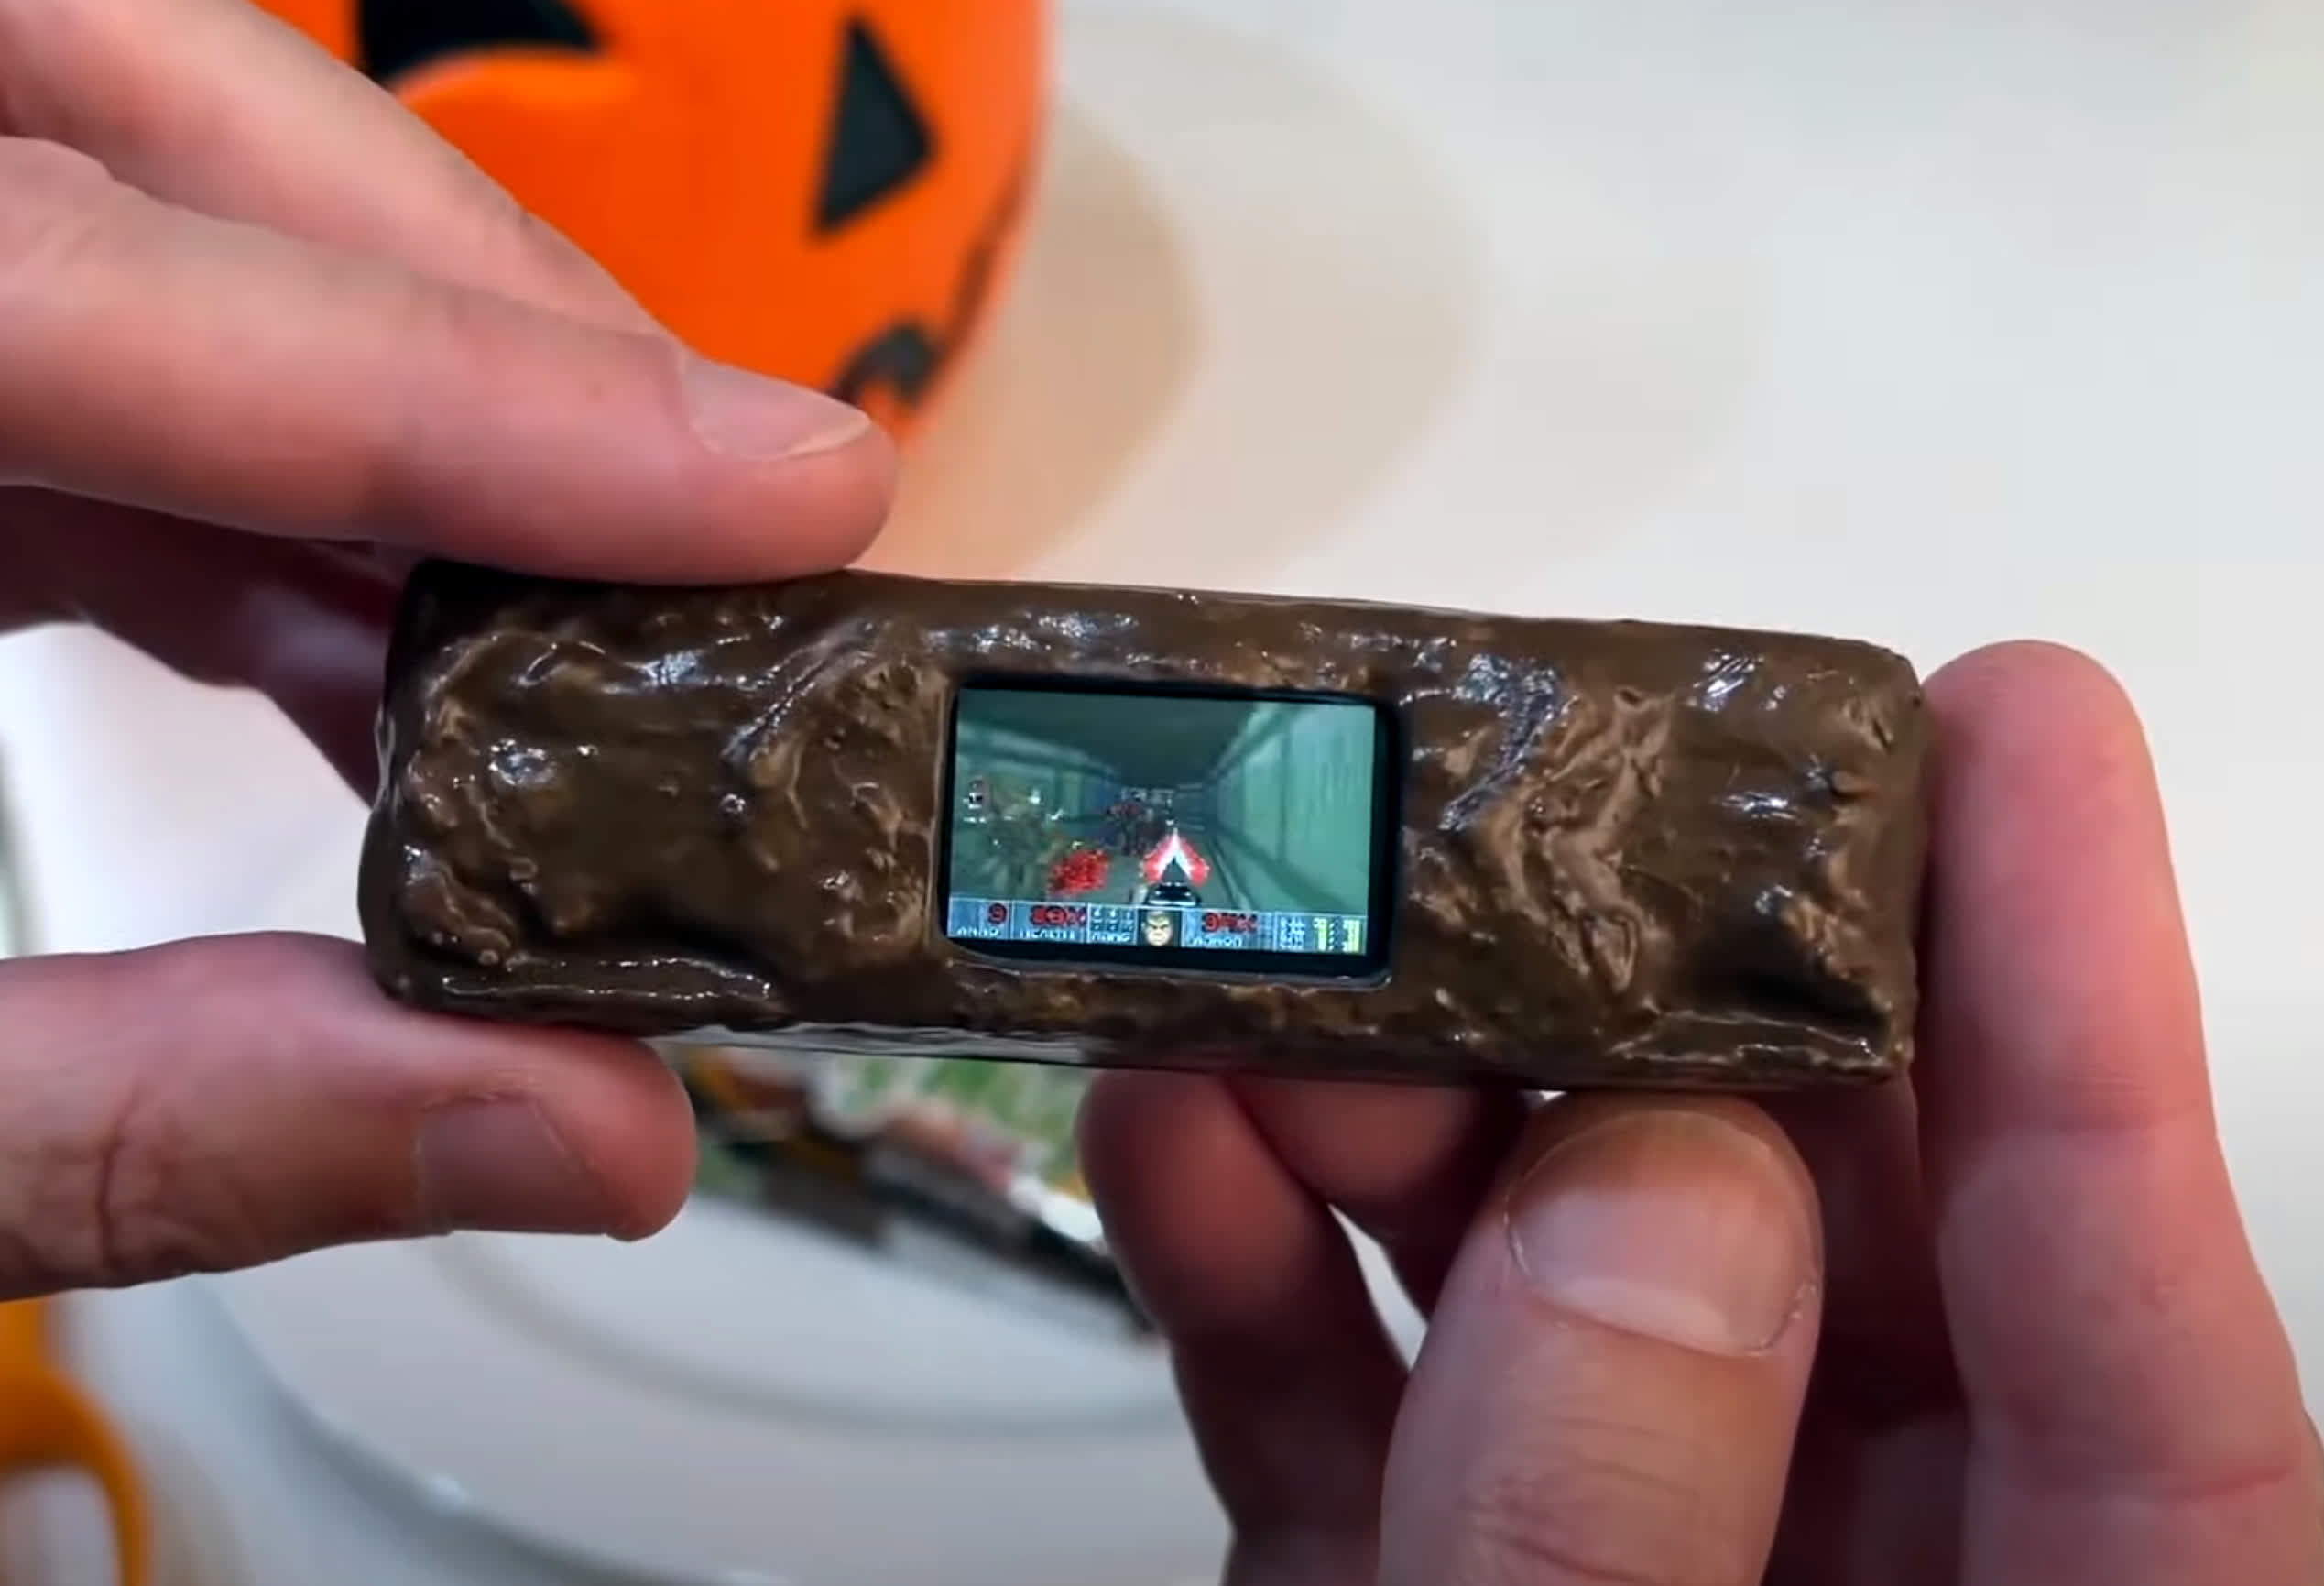 This candy bar running Doom is the best Halloween candy